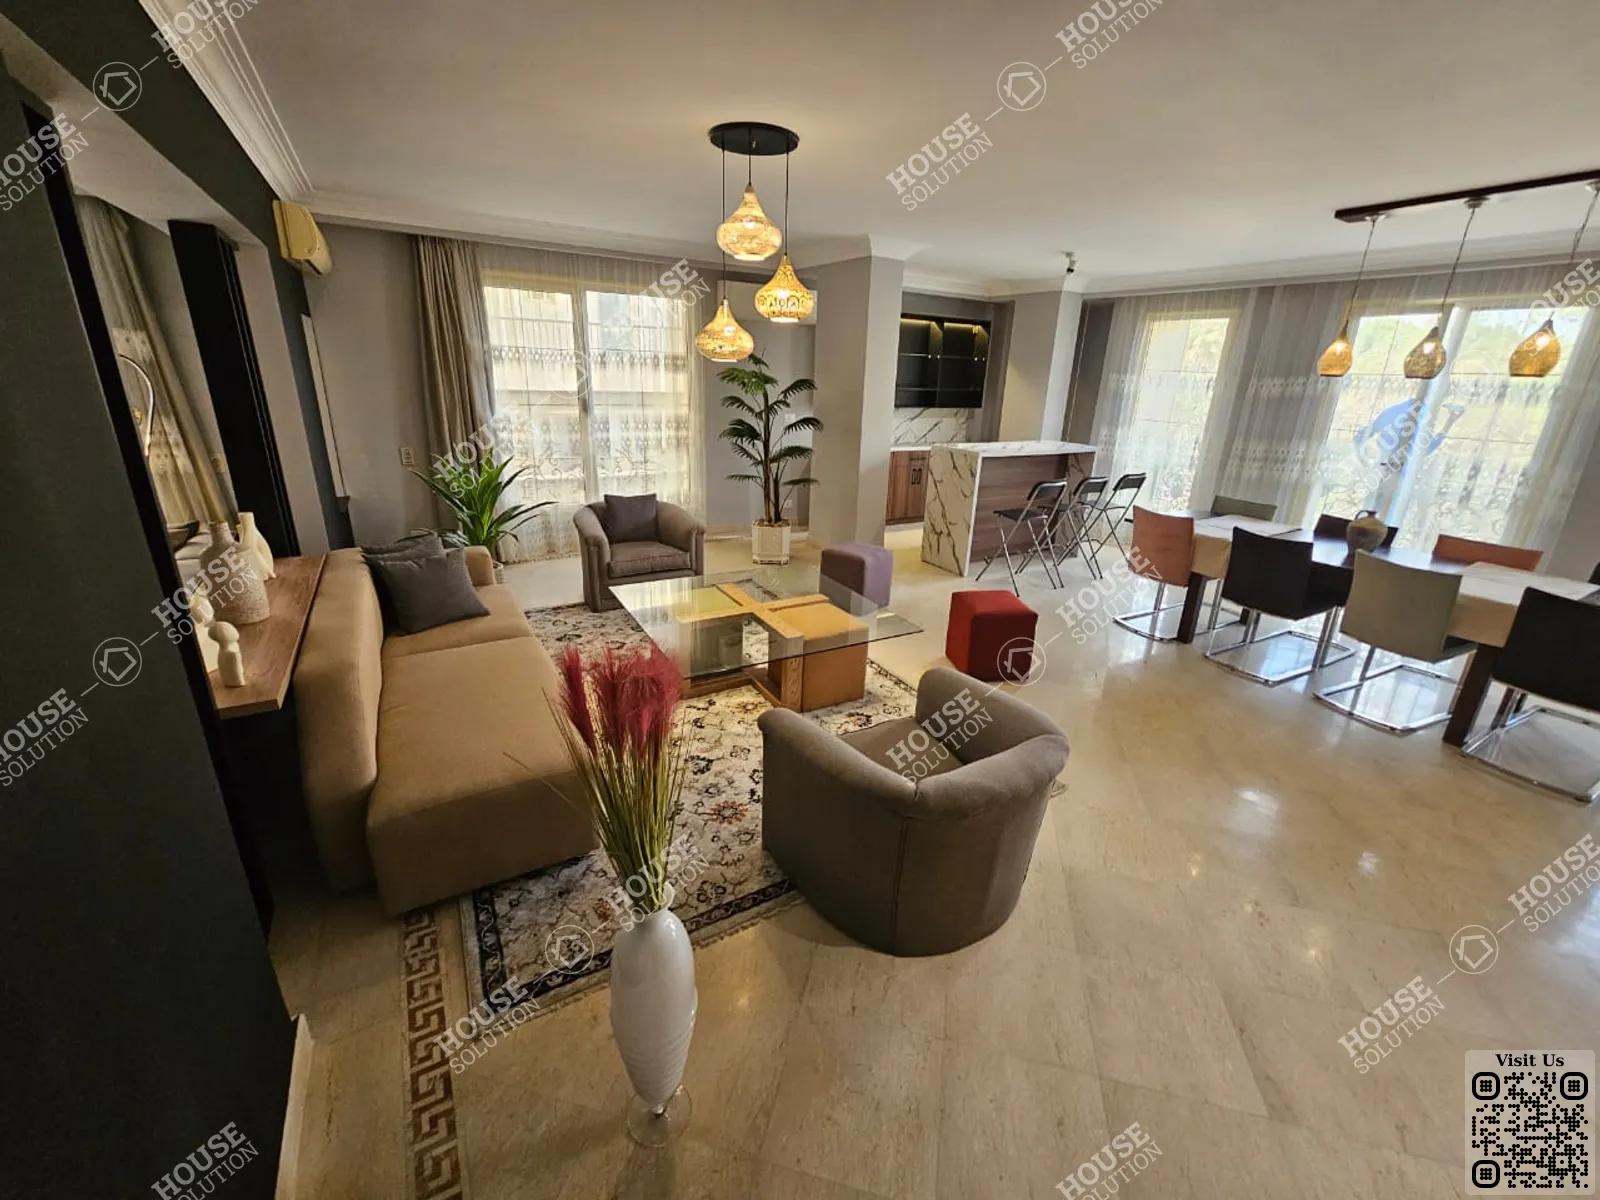 RECEPTION  @ Apartments For Rent In Maadi Maadi Sarayat Area: 320 m² consists of 4 Bedrooms 3 Bathrooms Modern furnished 5 stars #5817-1